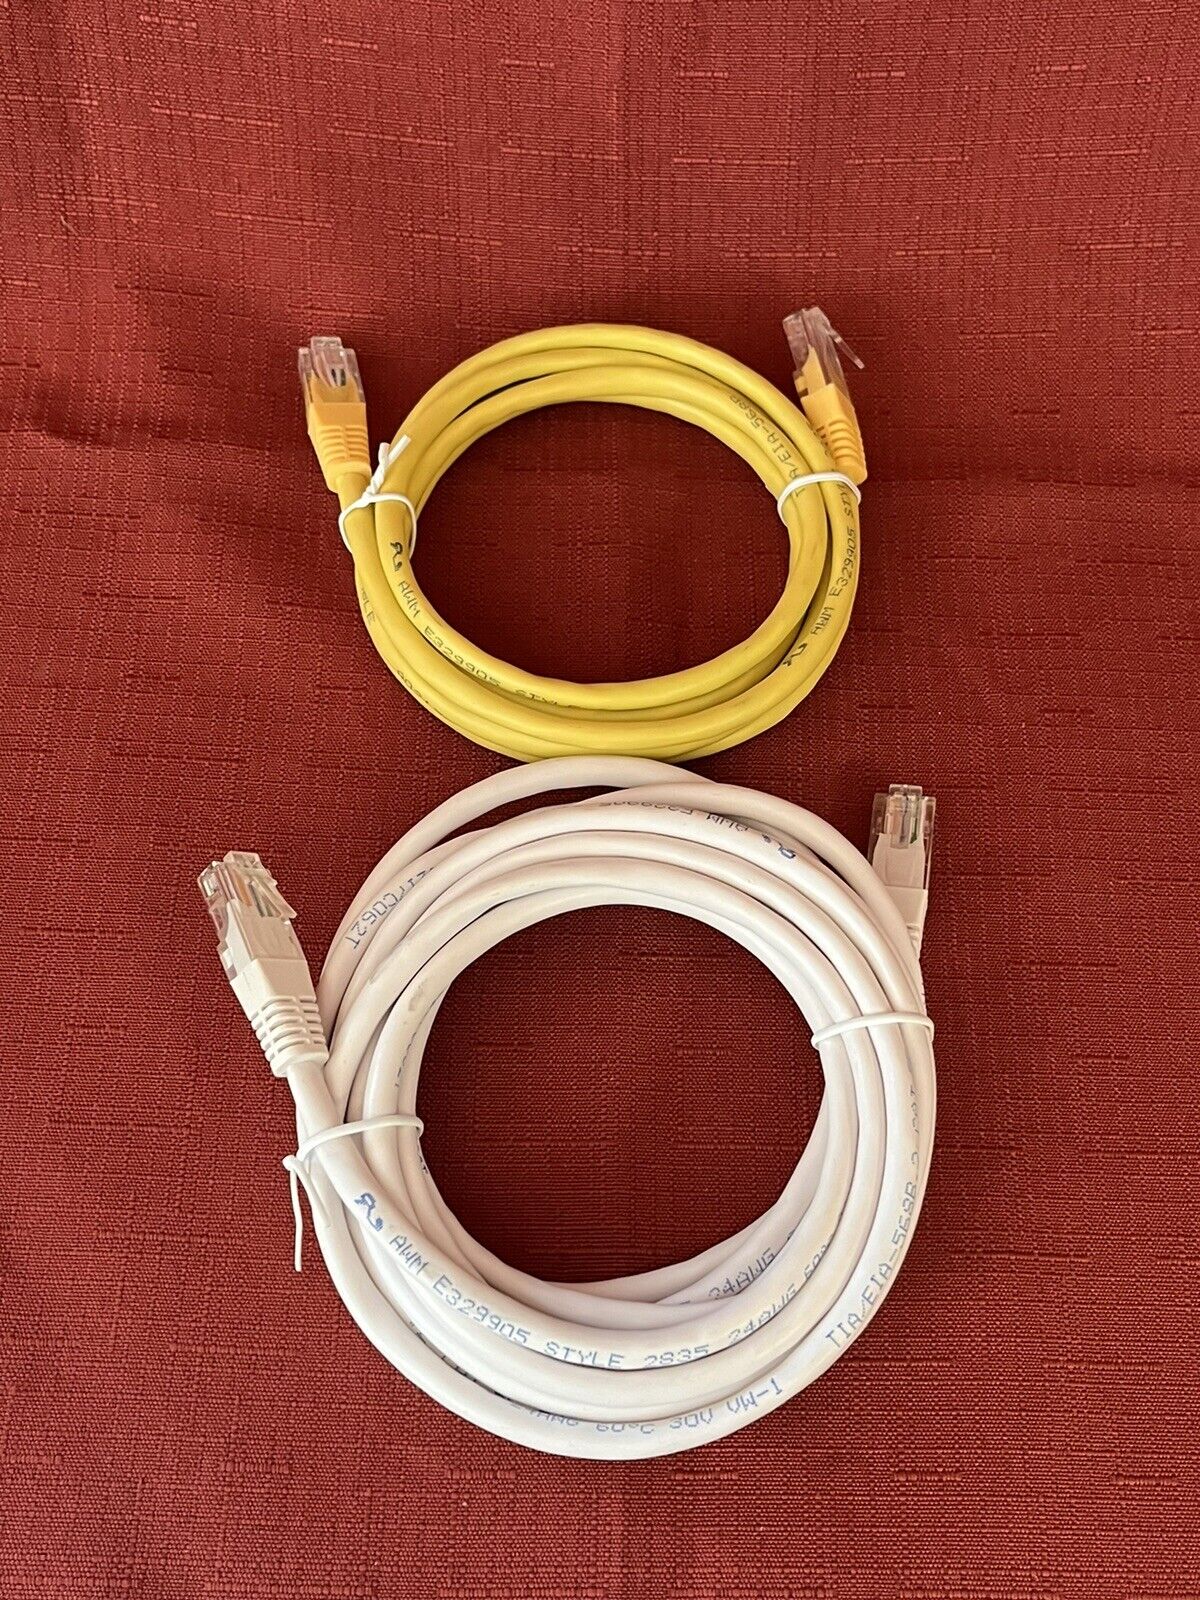 2 ETHERNET LAN NETWORK PATCH CABLE YELLOW WHITE CORDS AWM E329905 STYLE 2835